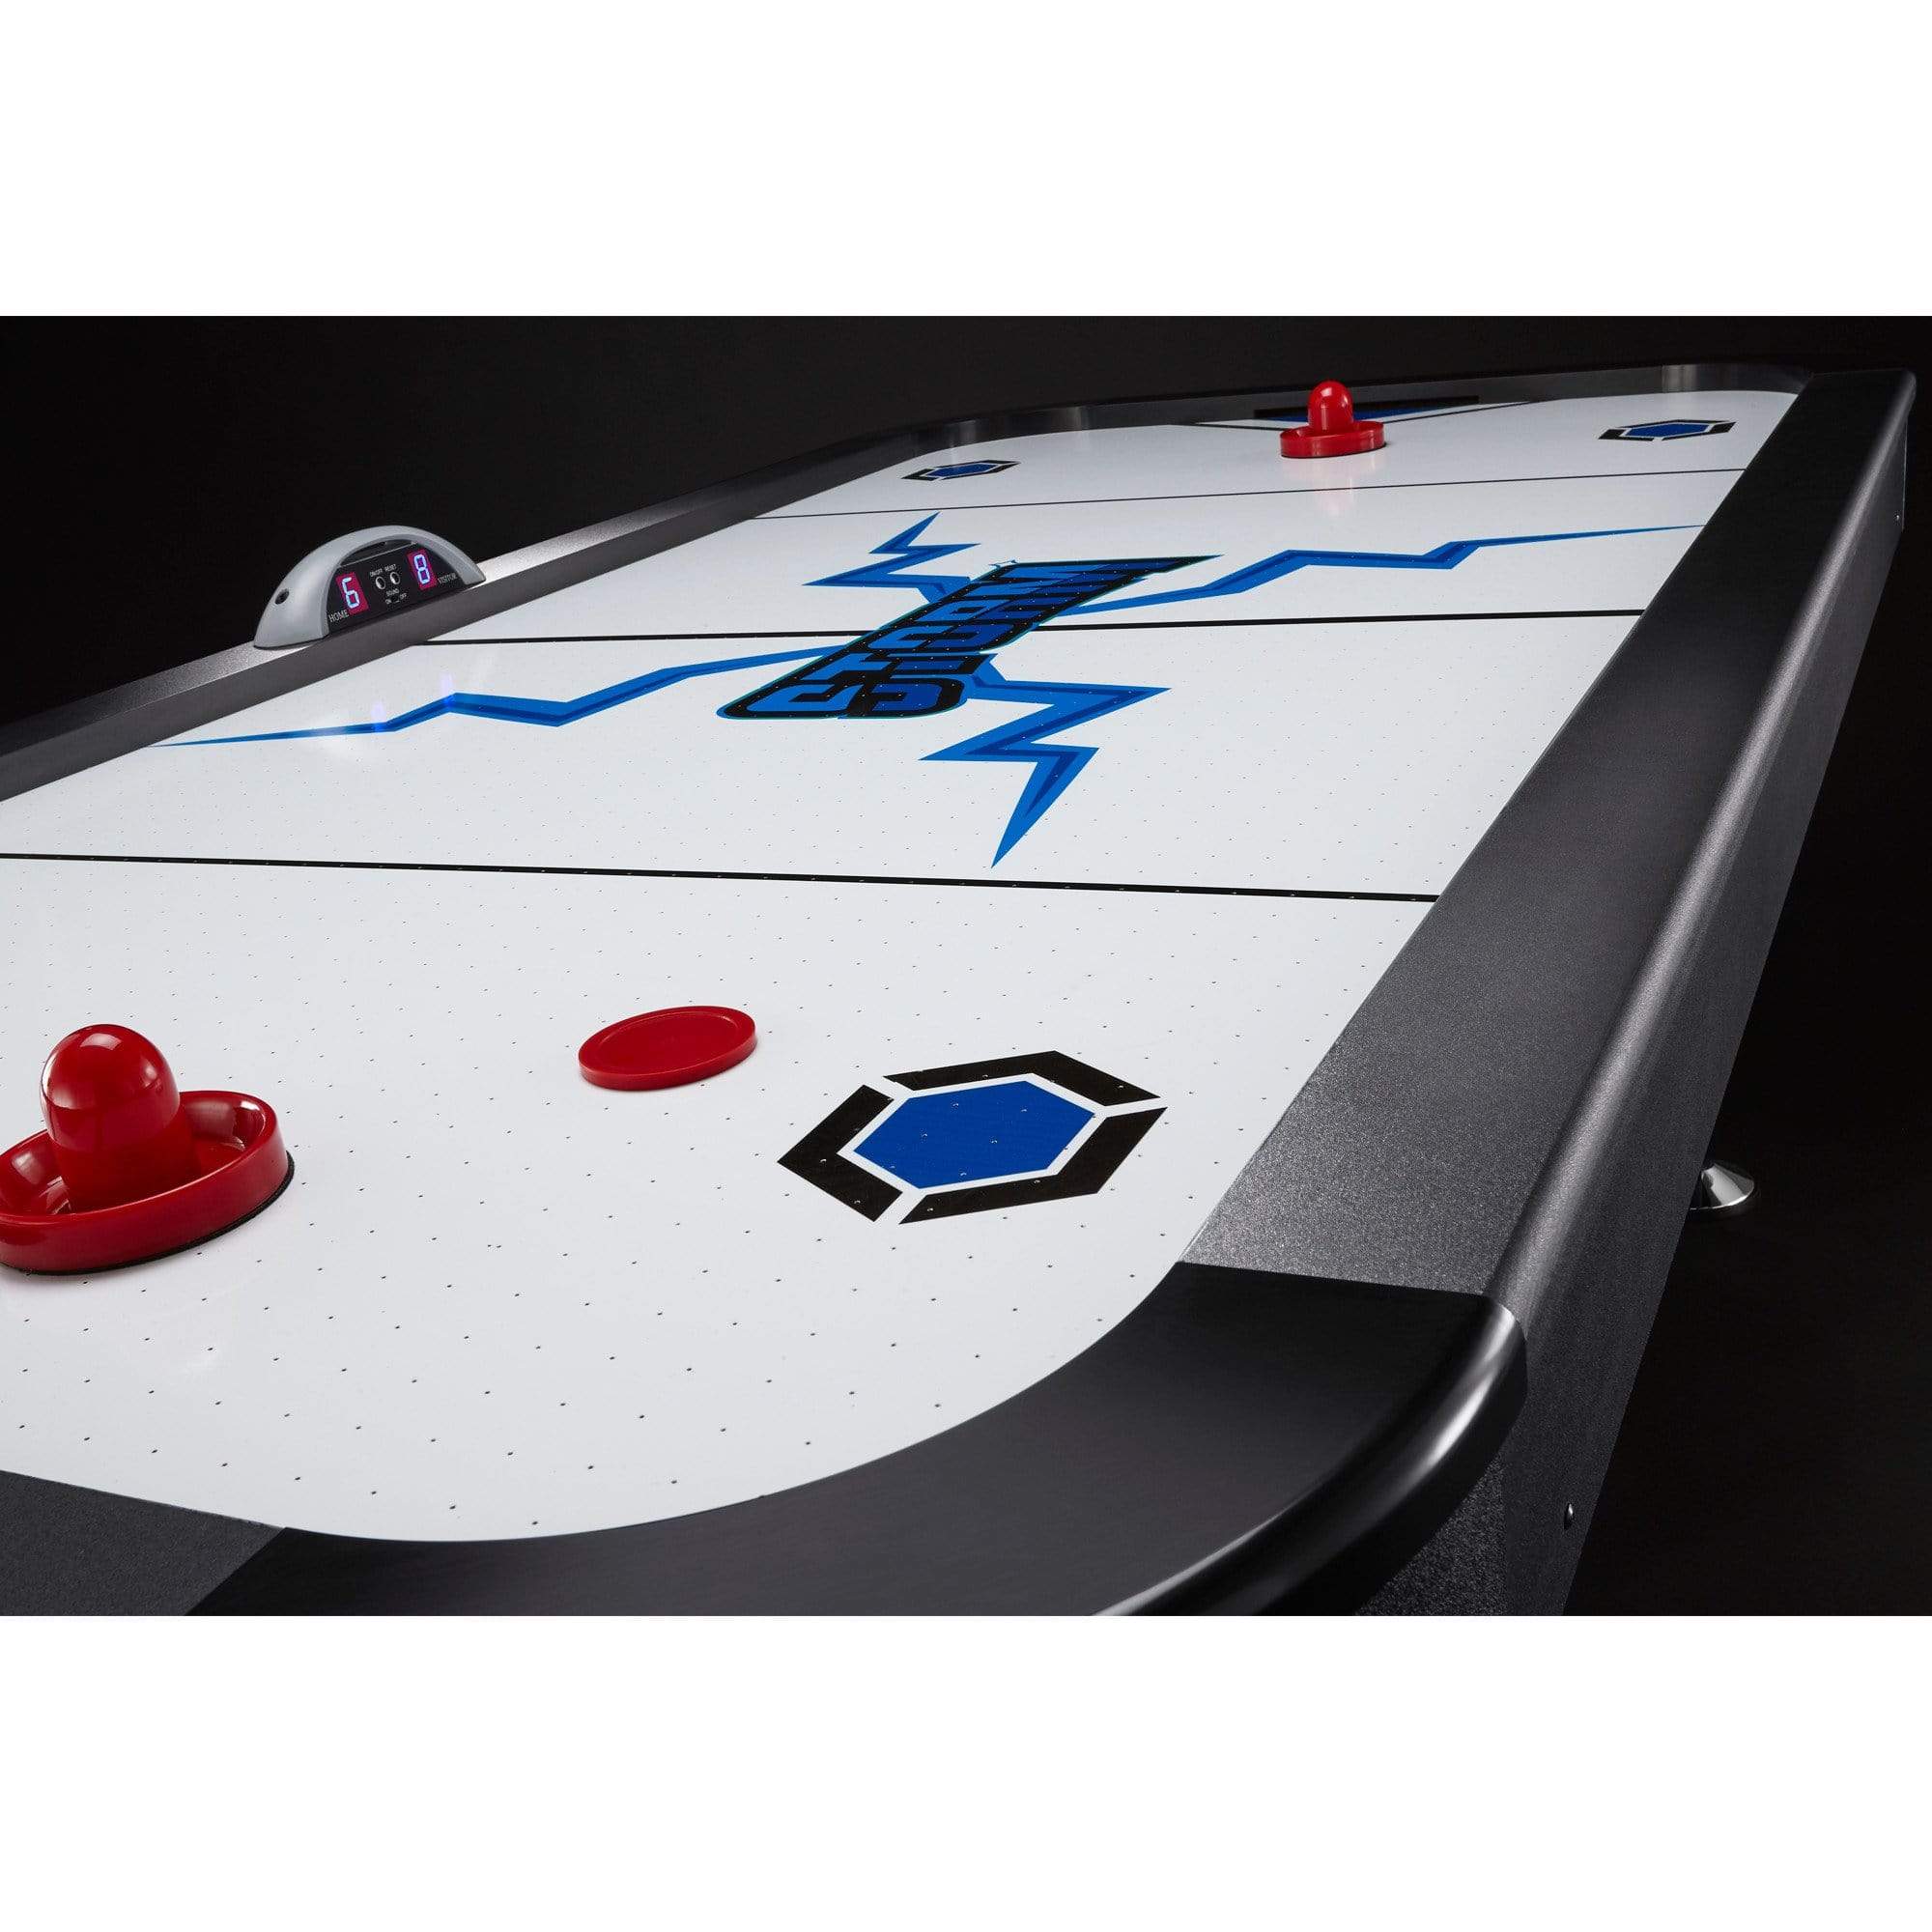 Fat Cat Game Table Black / As shown Fat Cat Storm MMXI 7' Air Hockey Table